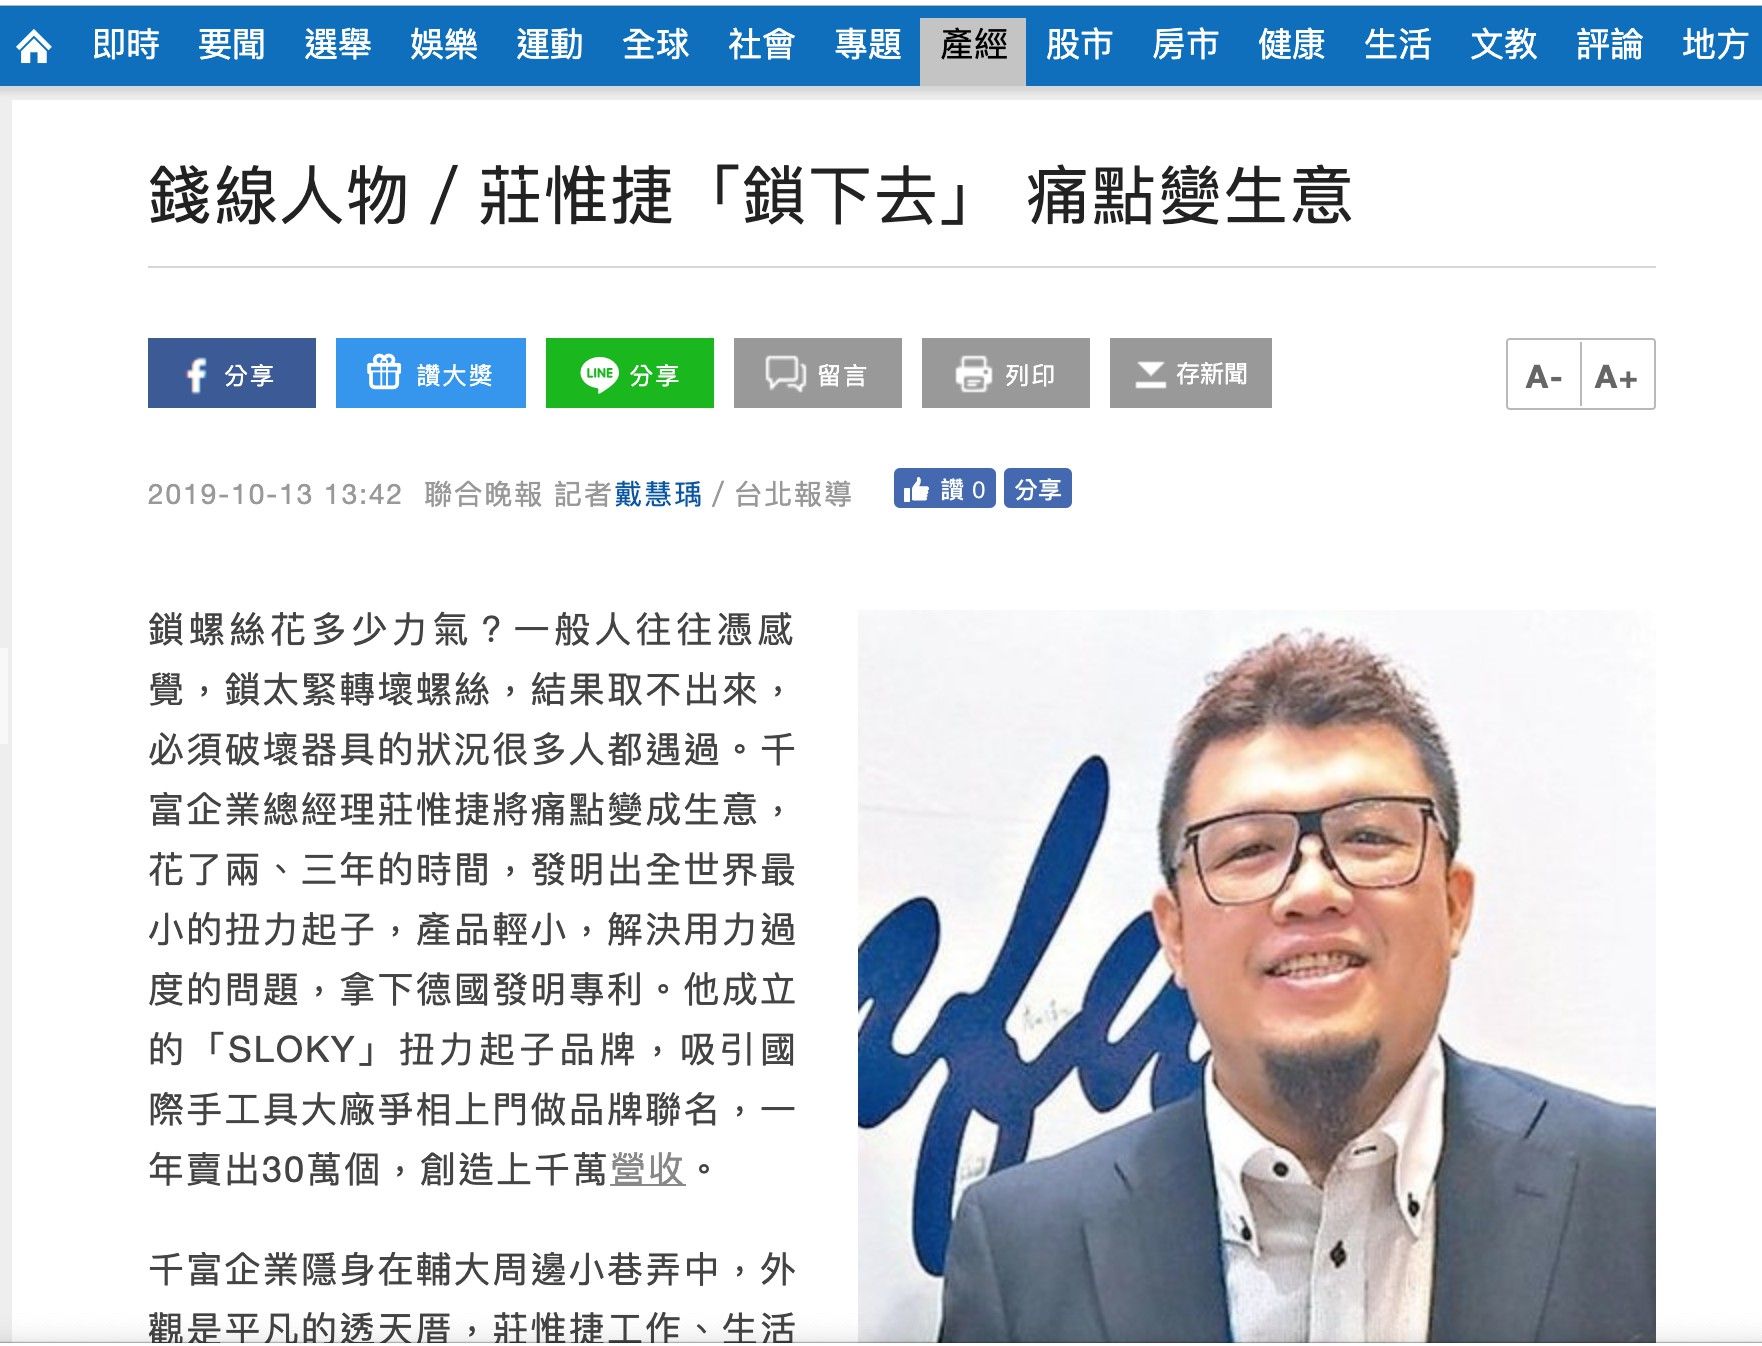 CEO of Chienfu Sloky, Jeff Chuang on Union Evening News